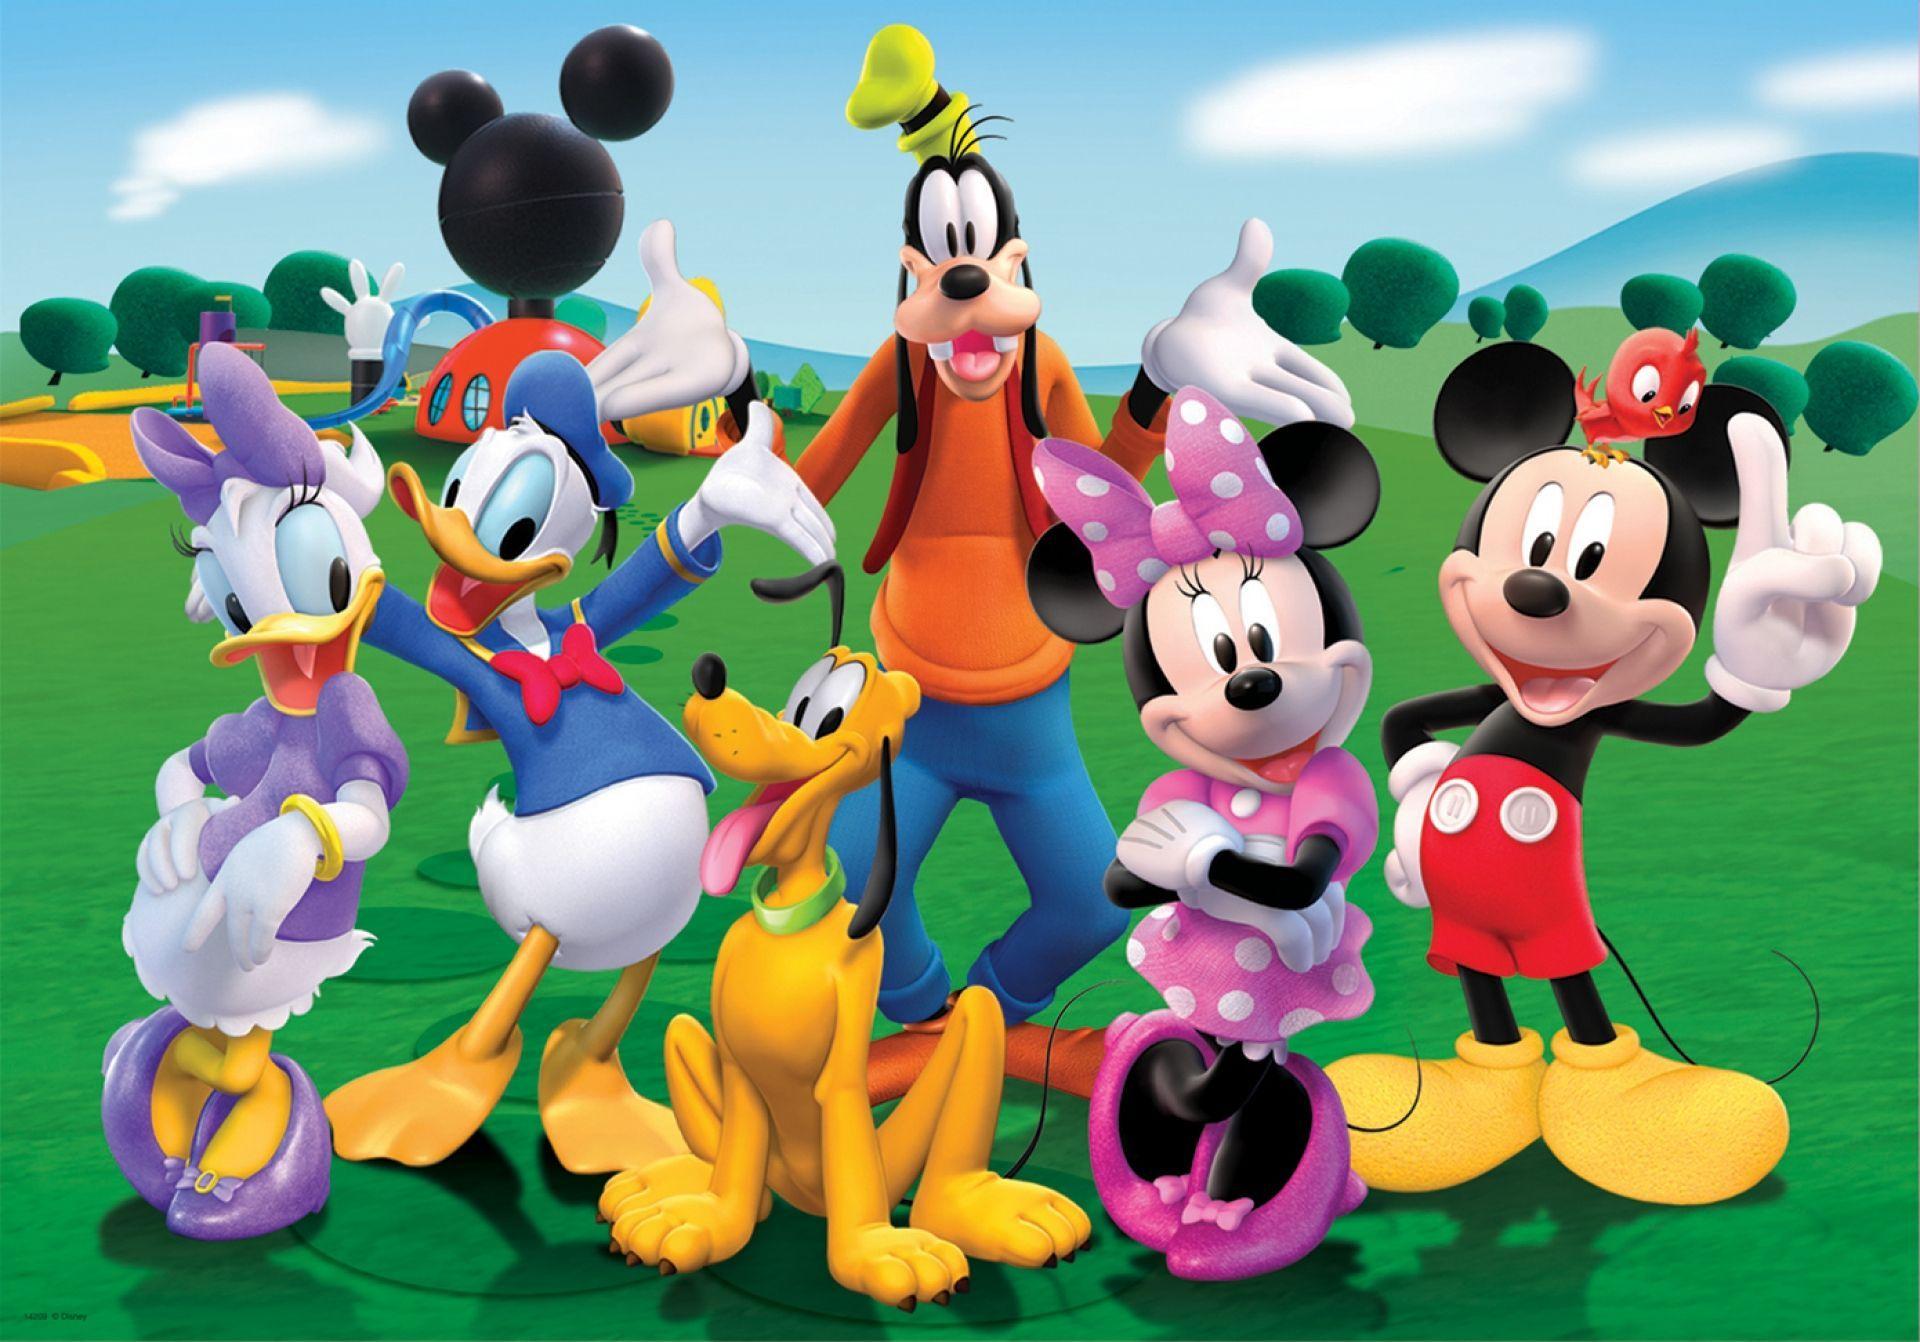 Mickey Mouse Club House Wallpaper HD Download. Mickey, Minnie